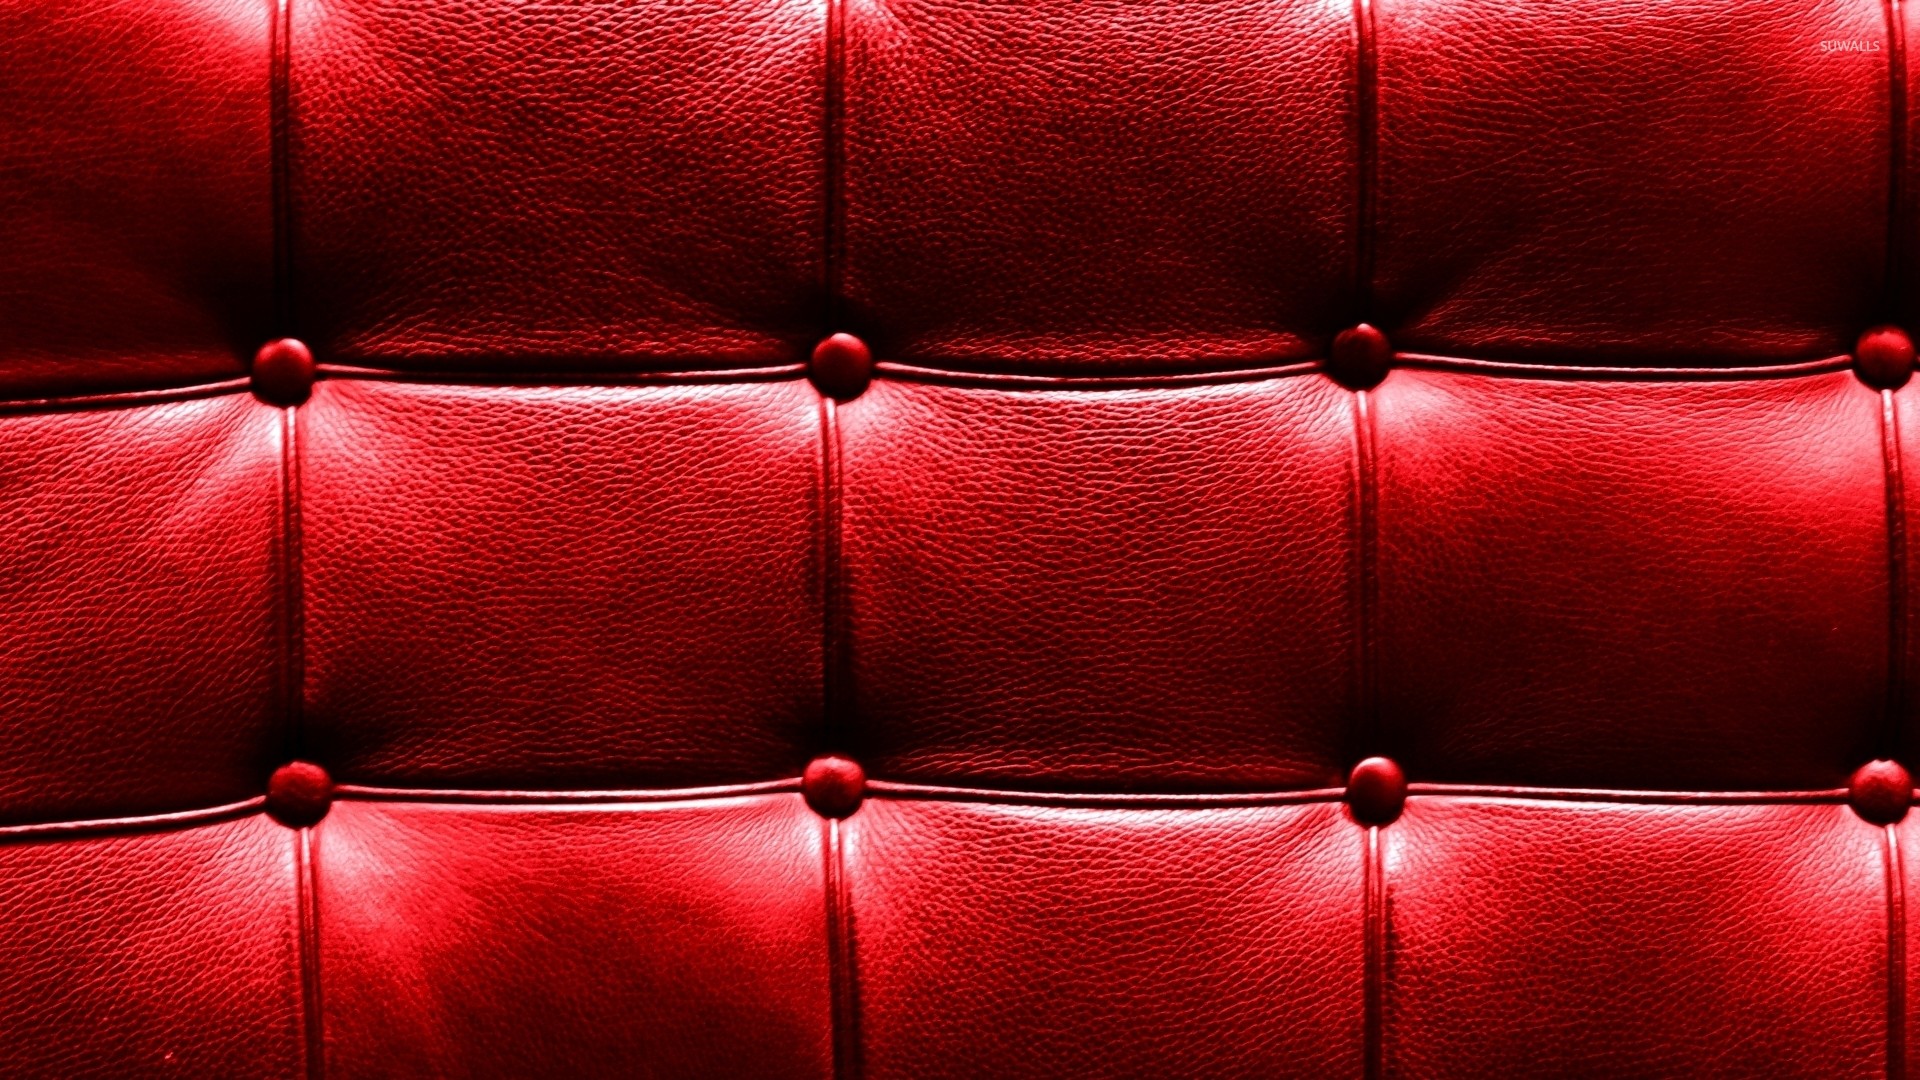 1920x1080 Red leather pattern wallpaper